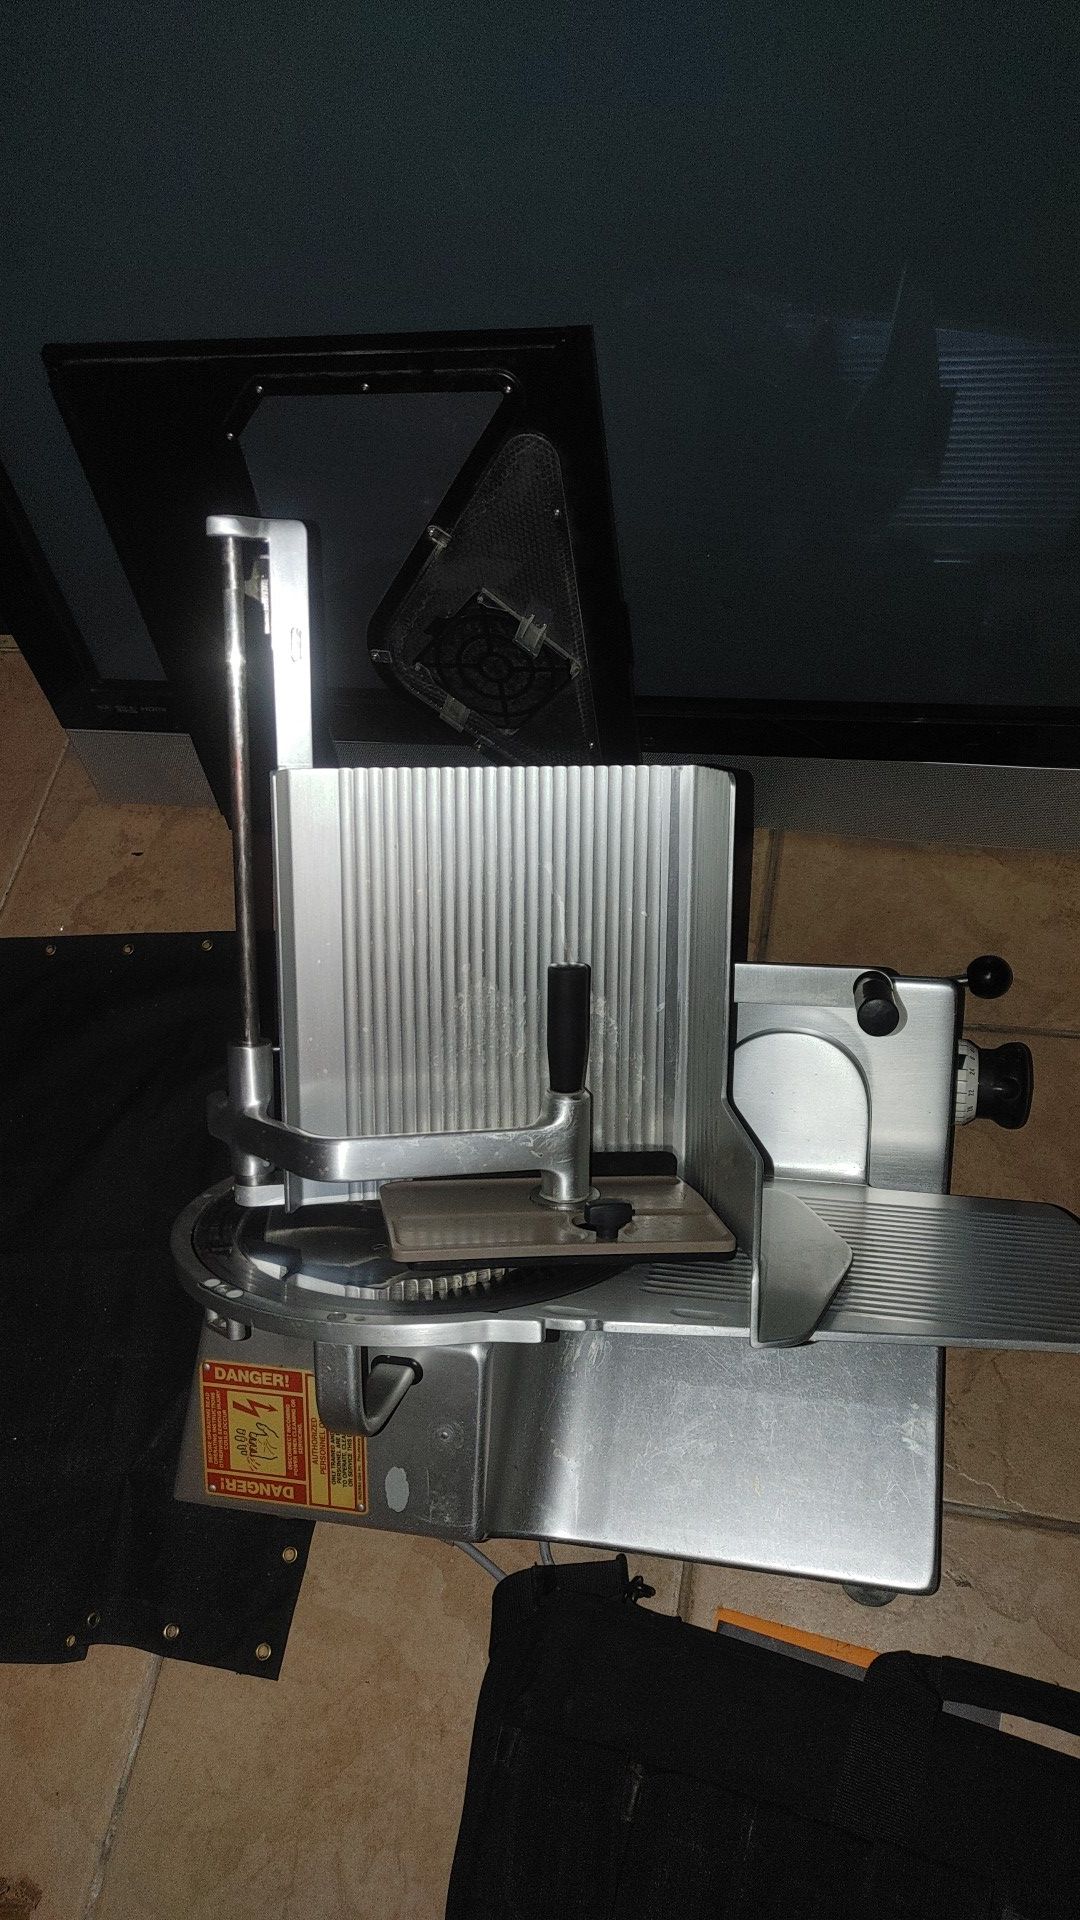 Bizerba meat slicer for sail like new asking. $1000.00